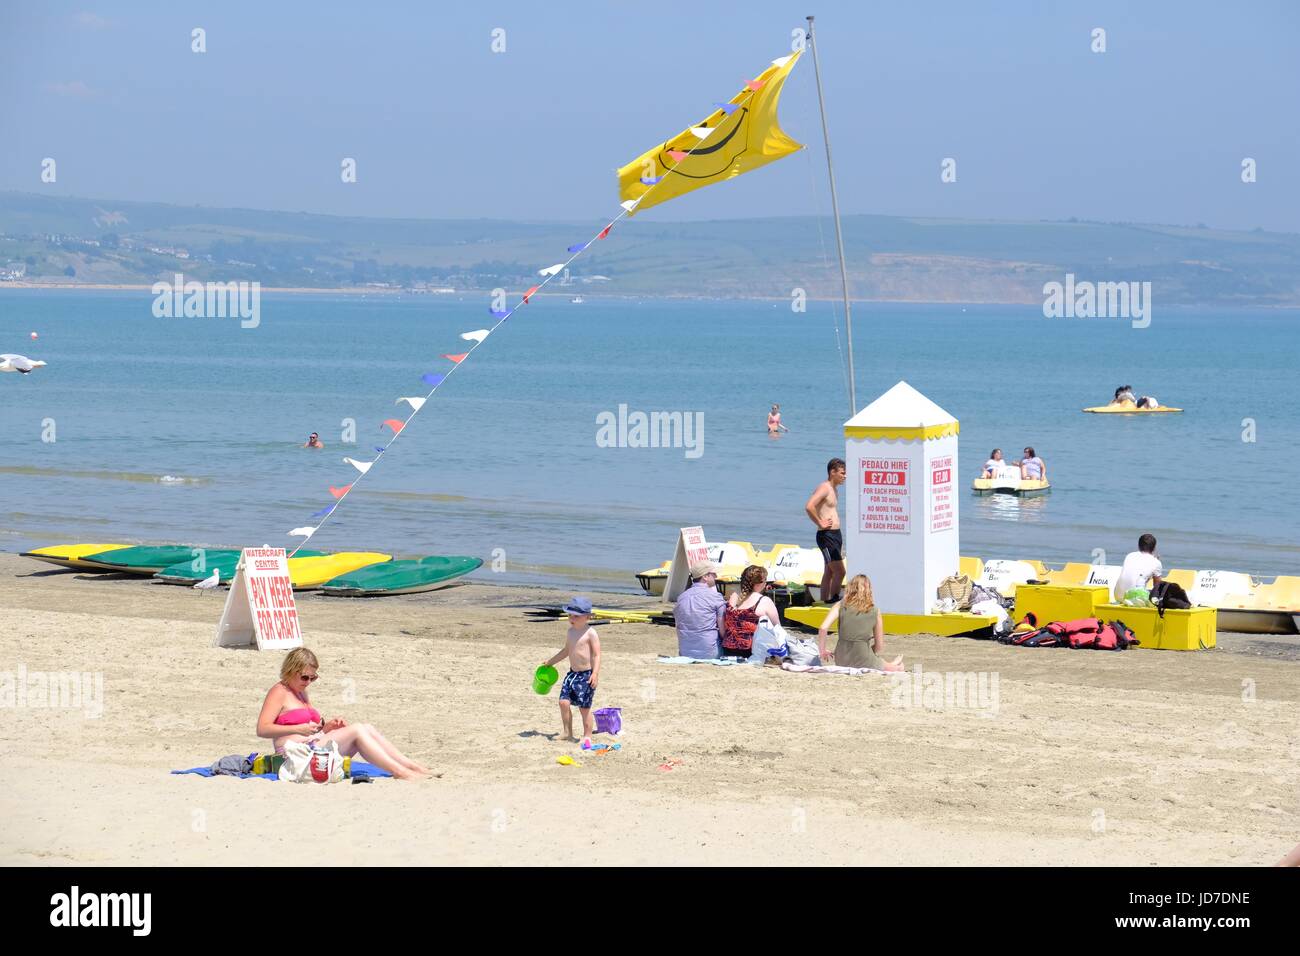 Weymouth, Dorset, UK. 19th June, 2017. Beach goers enjoy the hot weather on Weymouth beach as the Government issue a level three heat alert on a day where temperatures are expected to peak at 34C in parts of the UK bringing the hottest June day since 1976. Credit: Tom Corban/Alamy Live News Stock Photo